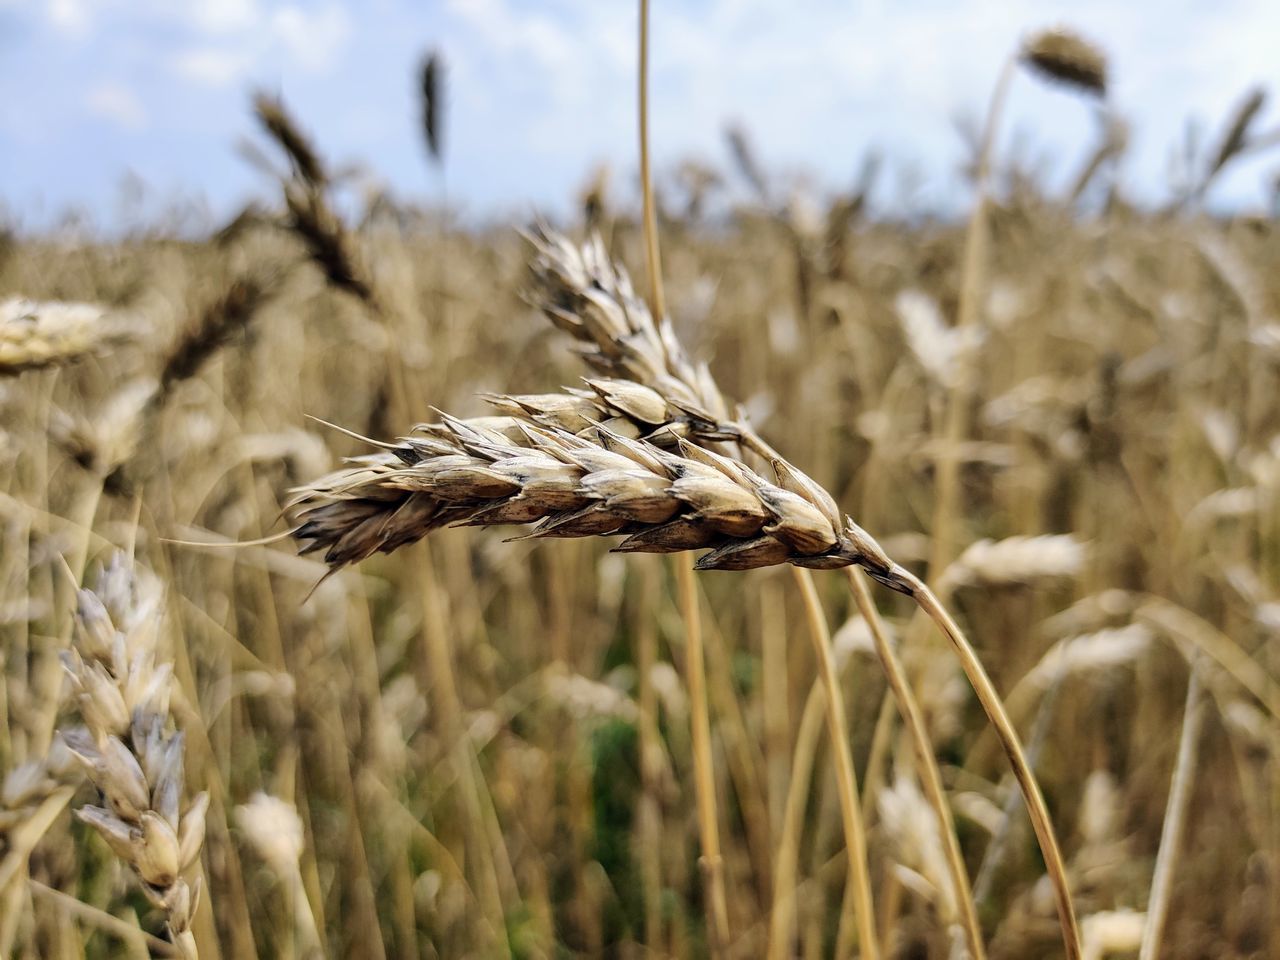 crop, cereal plant, agriculture, food, plant, field, rural scene, landscape, wheat, growth, food grain, land, nature, farm, focus on foreground, rye, close-up, barley, grass, cereal, sky, whole grain, emmer, no people, food and drink, einkorn wheat, plant stem, beauty in nature, triticale, environment, outdoors, day, prairie, selective focus, gold, harvesting, scenics - nature, tranquility, summer, seed, ear of wheat, cultivated, hordeum